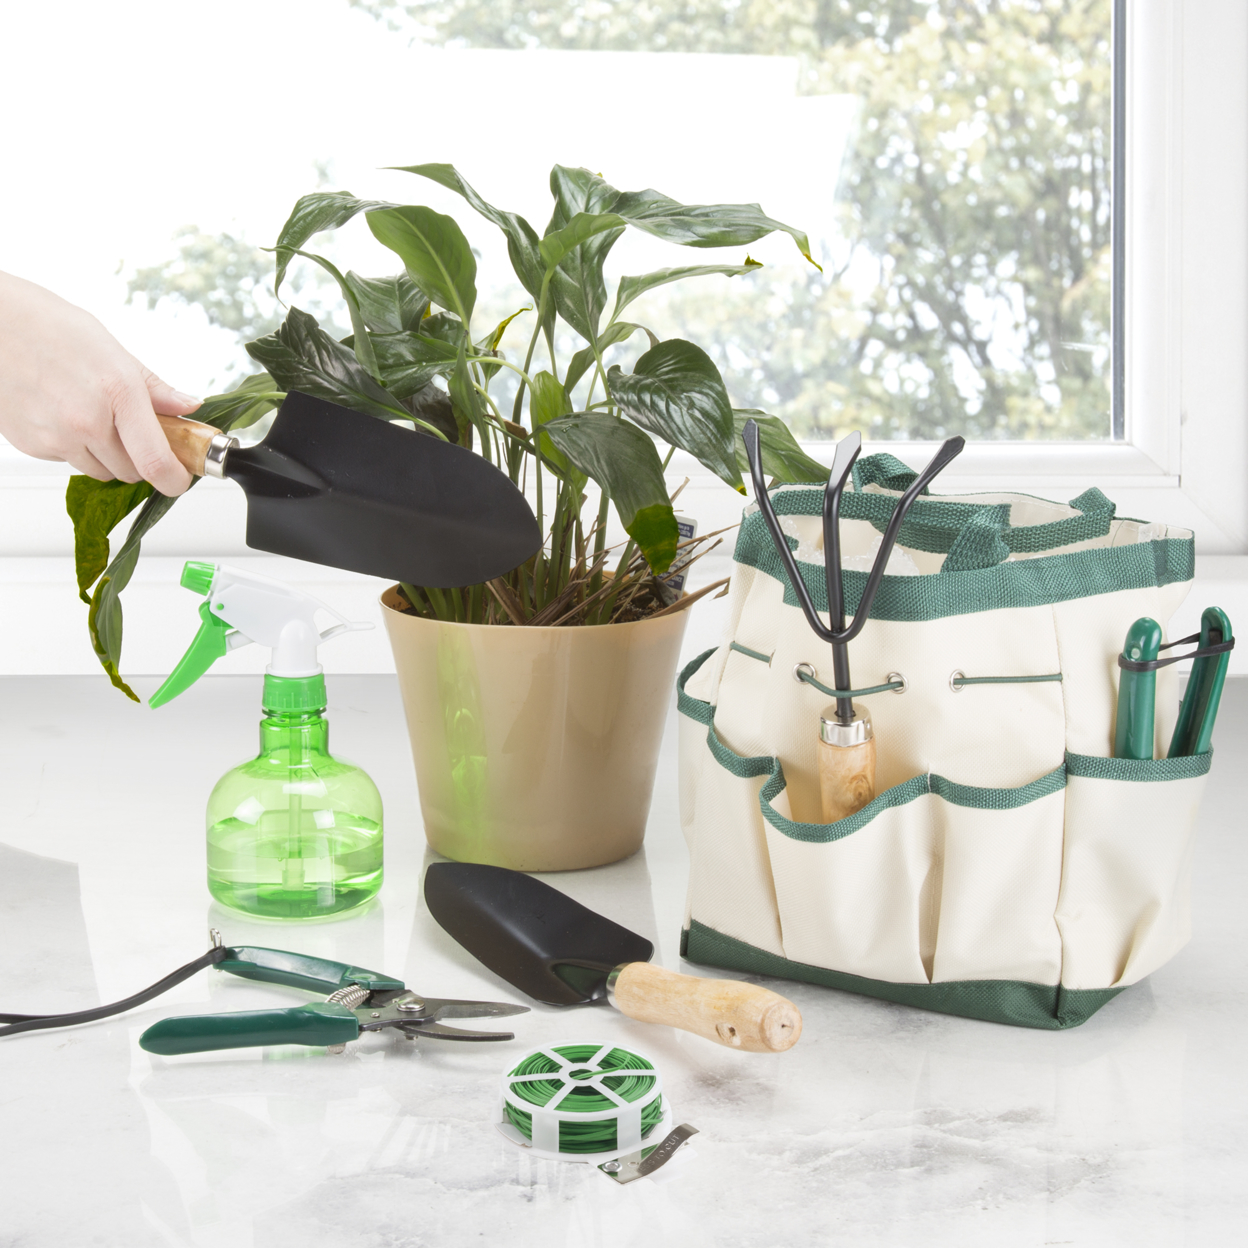 8-Piece Garden Tool And Tote Set